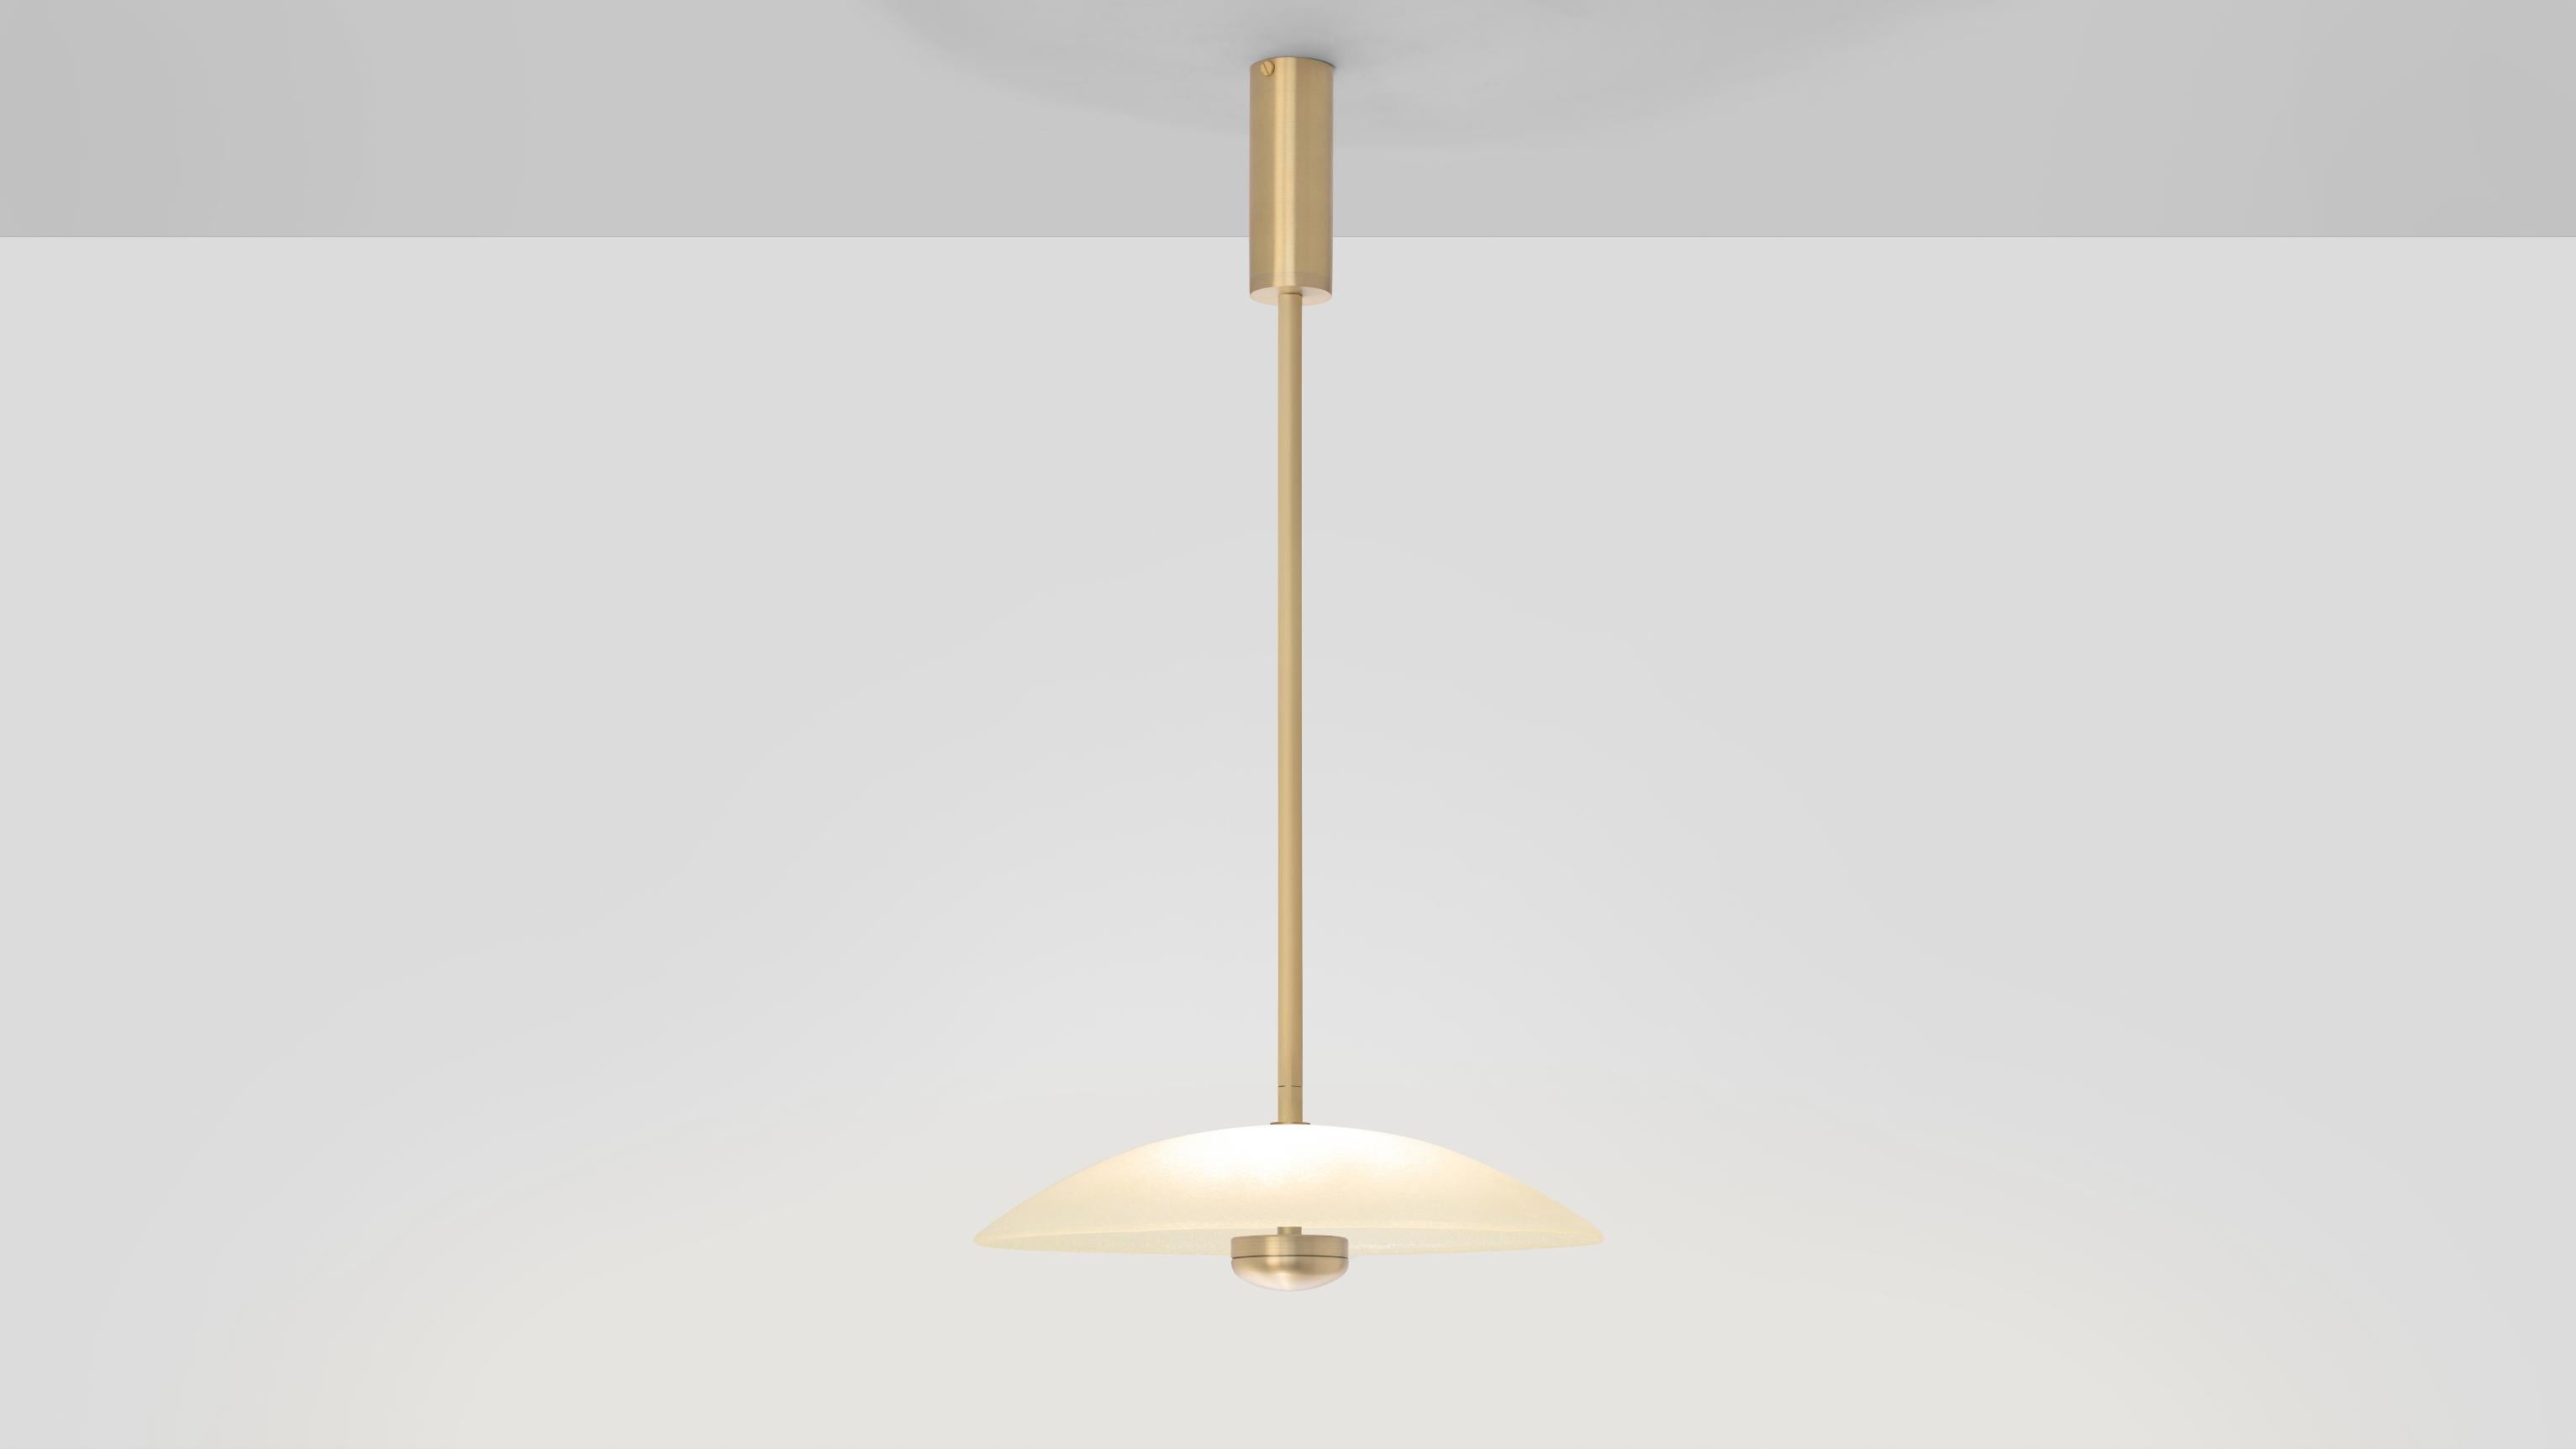 Cielo small pendant by CTO Lighting
Materials: satin brass with hand fritted glass.
Also available in bronze with hand fritted glass.
Dimensions: H 22.5 x D 31.5 cm 

All our lamps can be wired according to each country. If sold to the USA it